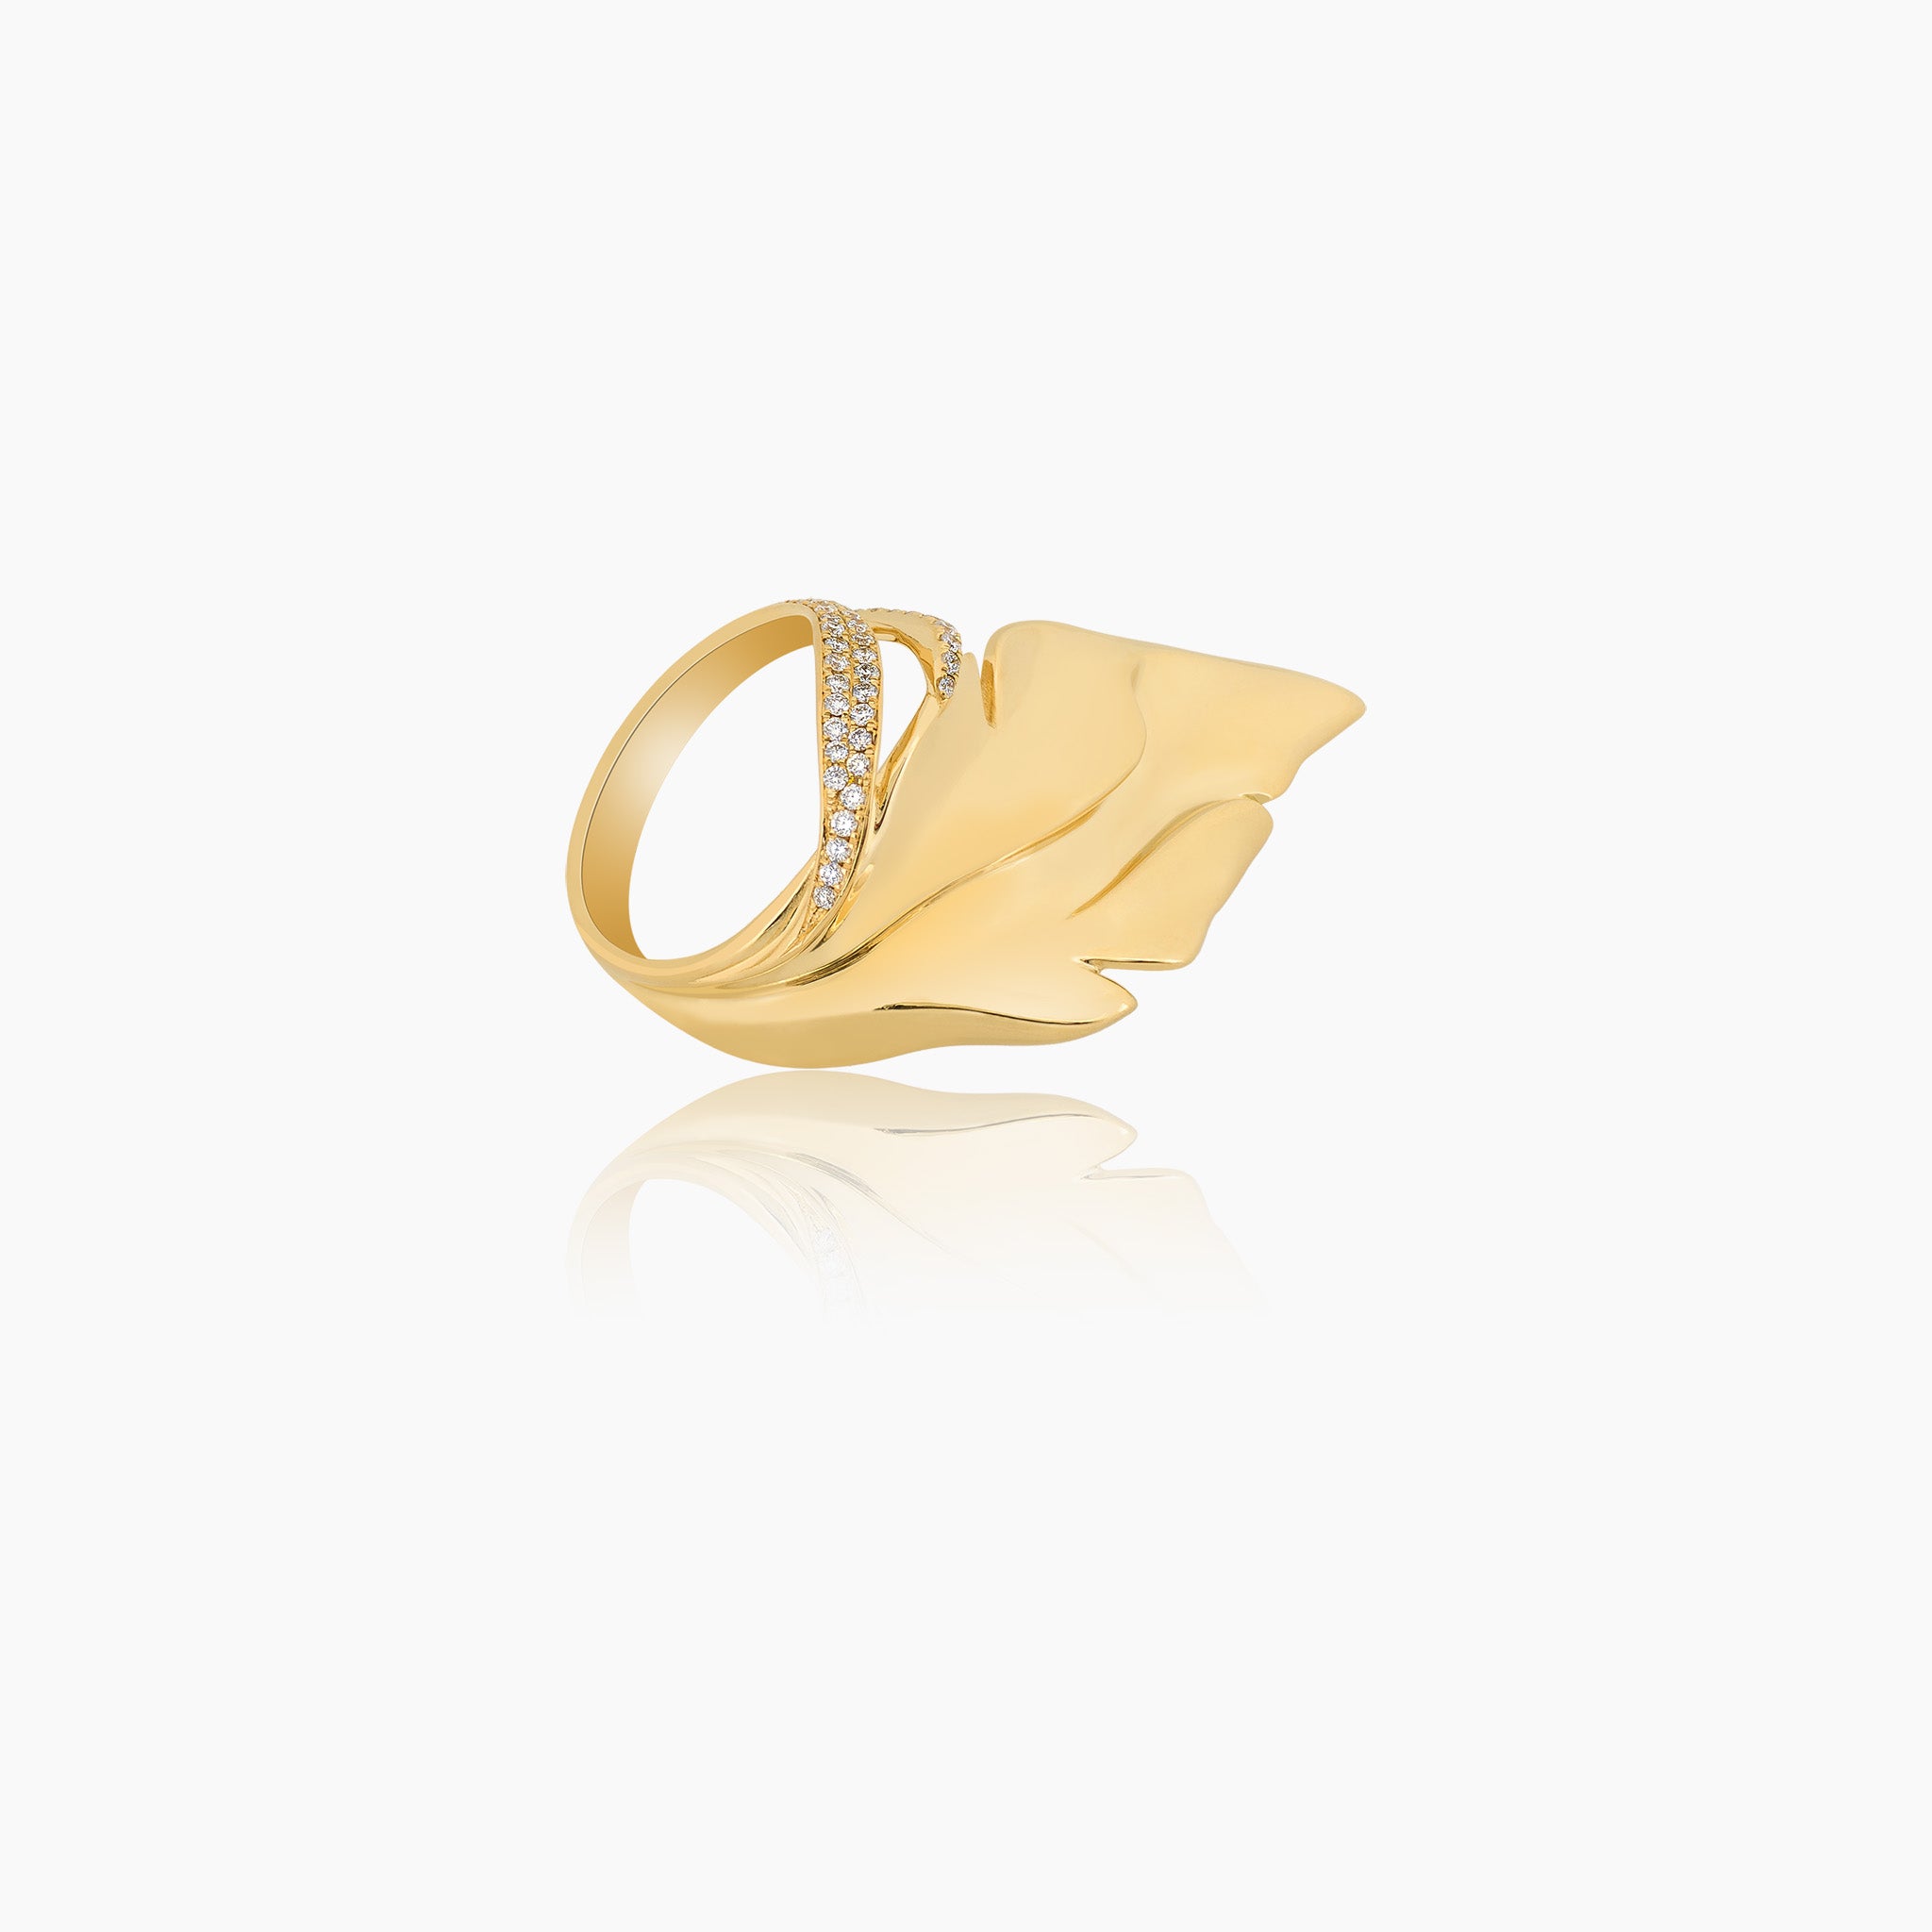 Hand-carved yellow gold leaf-shaped ring, adorned with exquisite details and diamonds, displayed against an off-white background.(sideview)